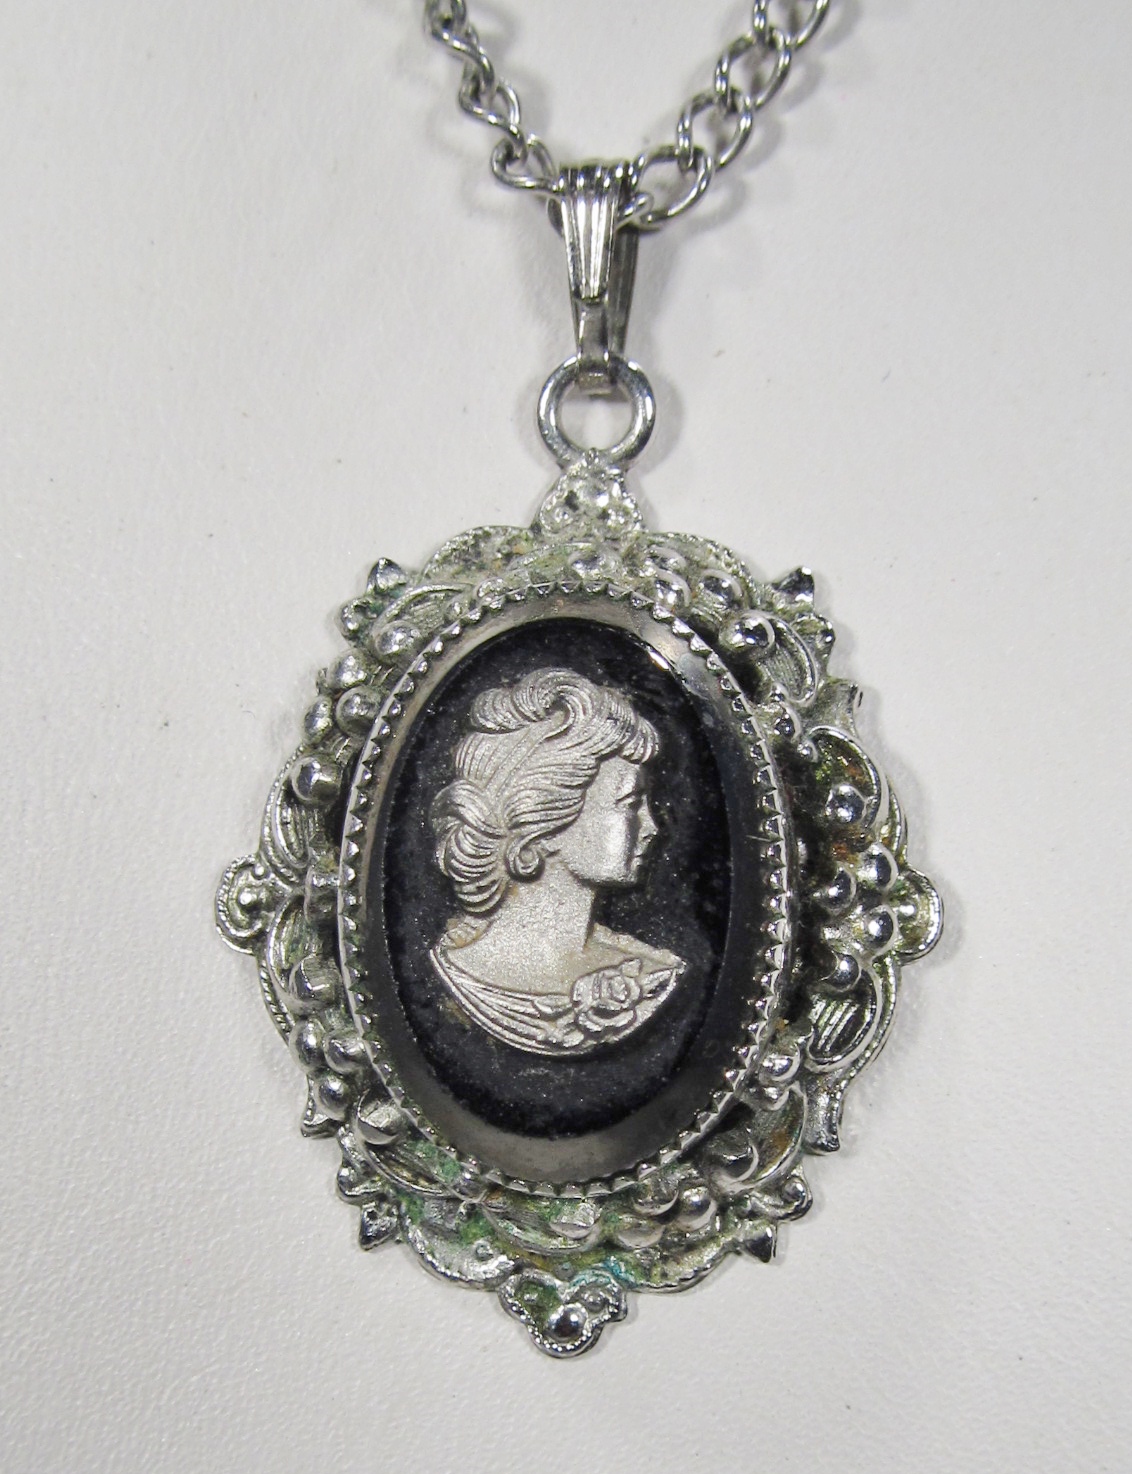 Whiting & Davis Cameo Pendant Necklace WC-064 - $45.00 : Decatur Coin ...